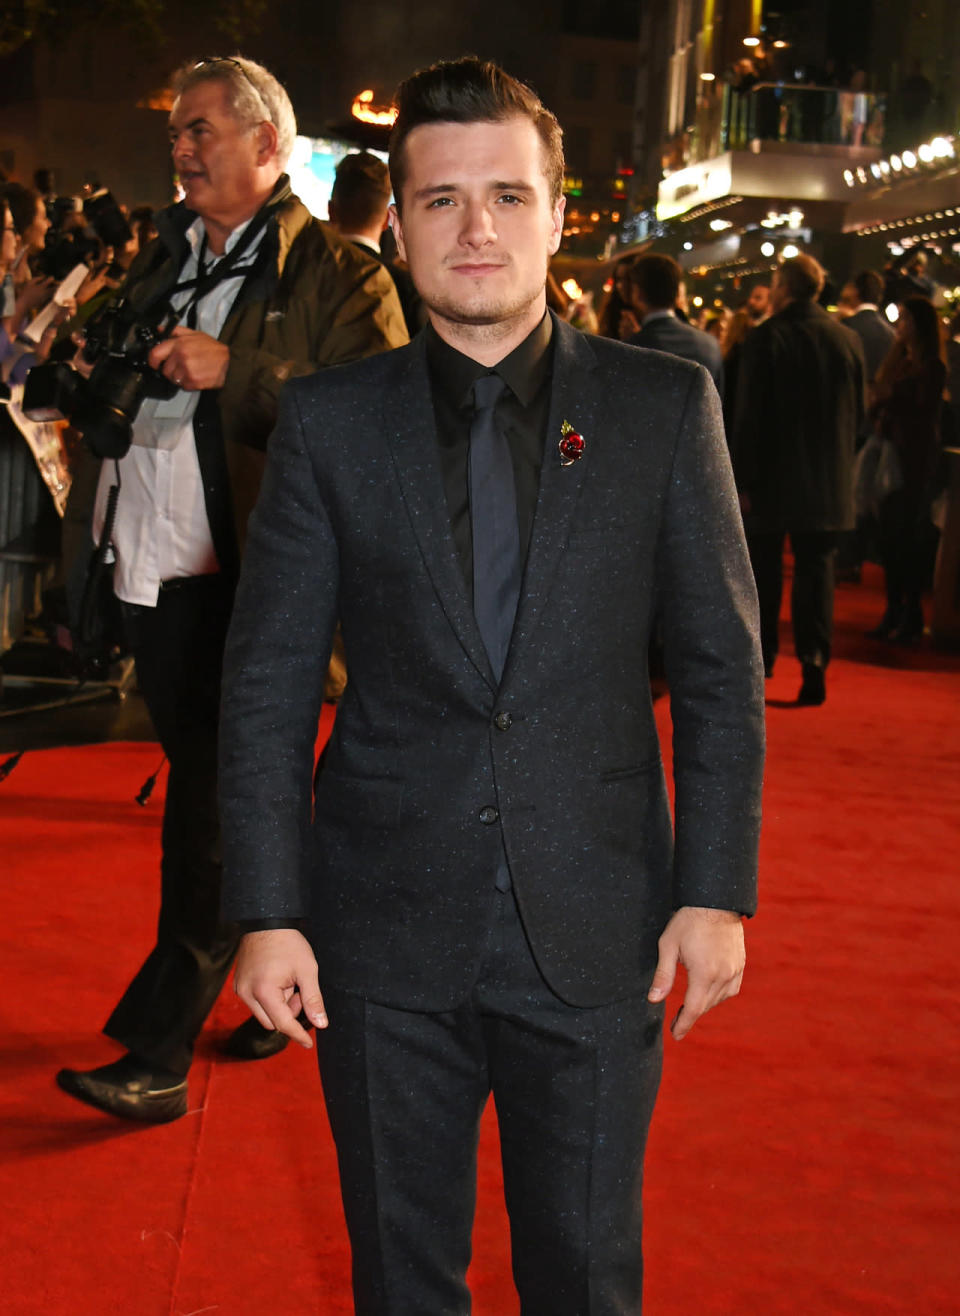 Josh Hutchinson in a wool suit at “The Hunger Games: Mockingjay - Part 2″ premiere in London.